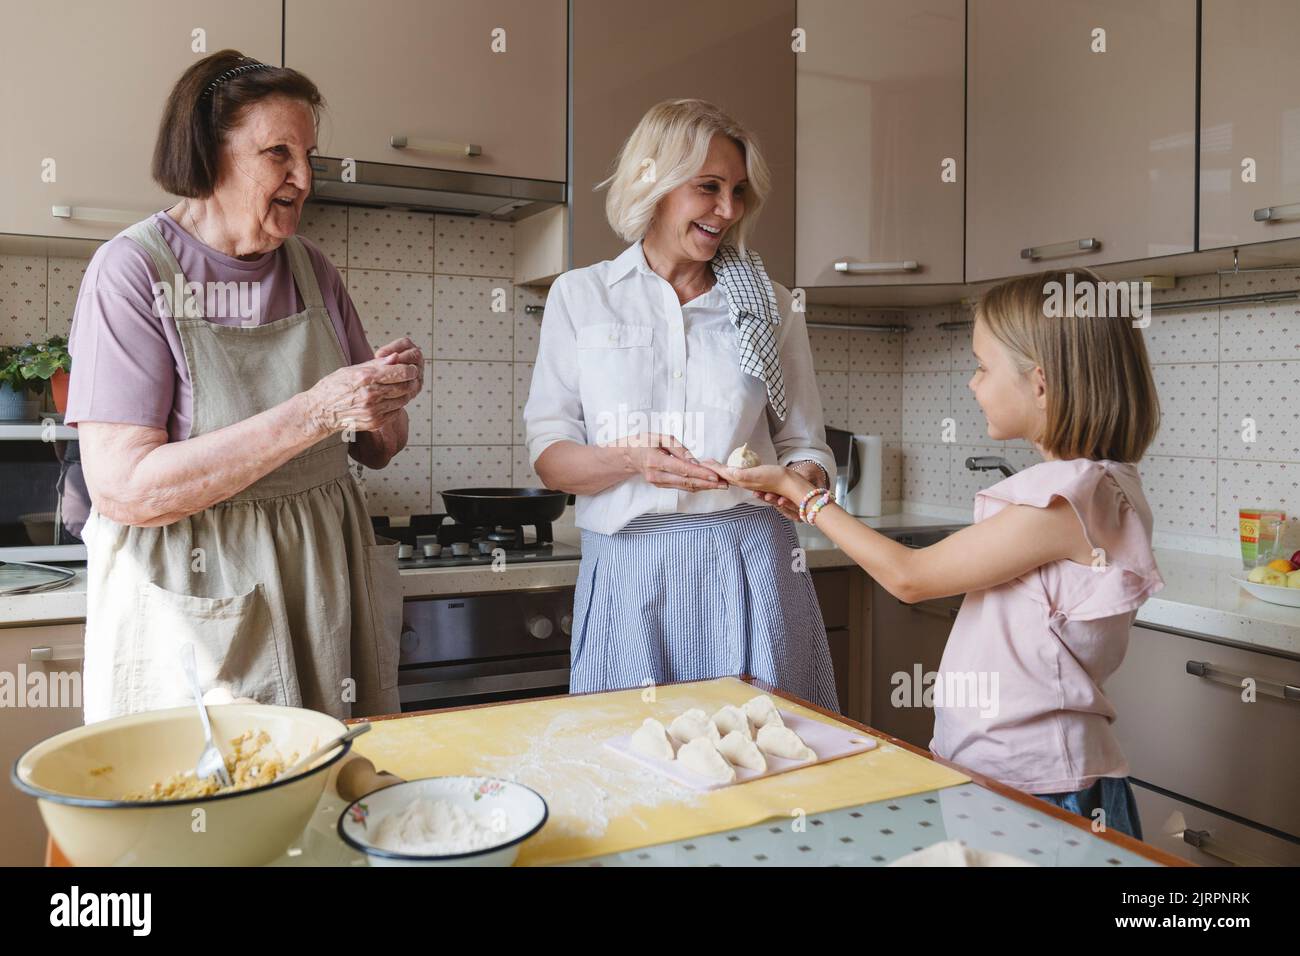 Three generations of women cook pies in the kitchen. Stock Photo